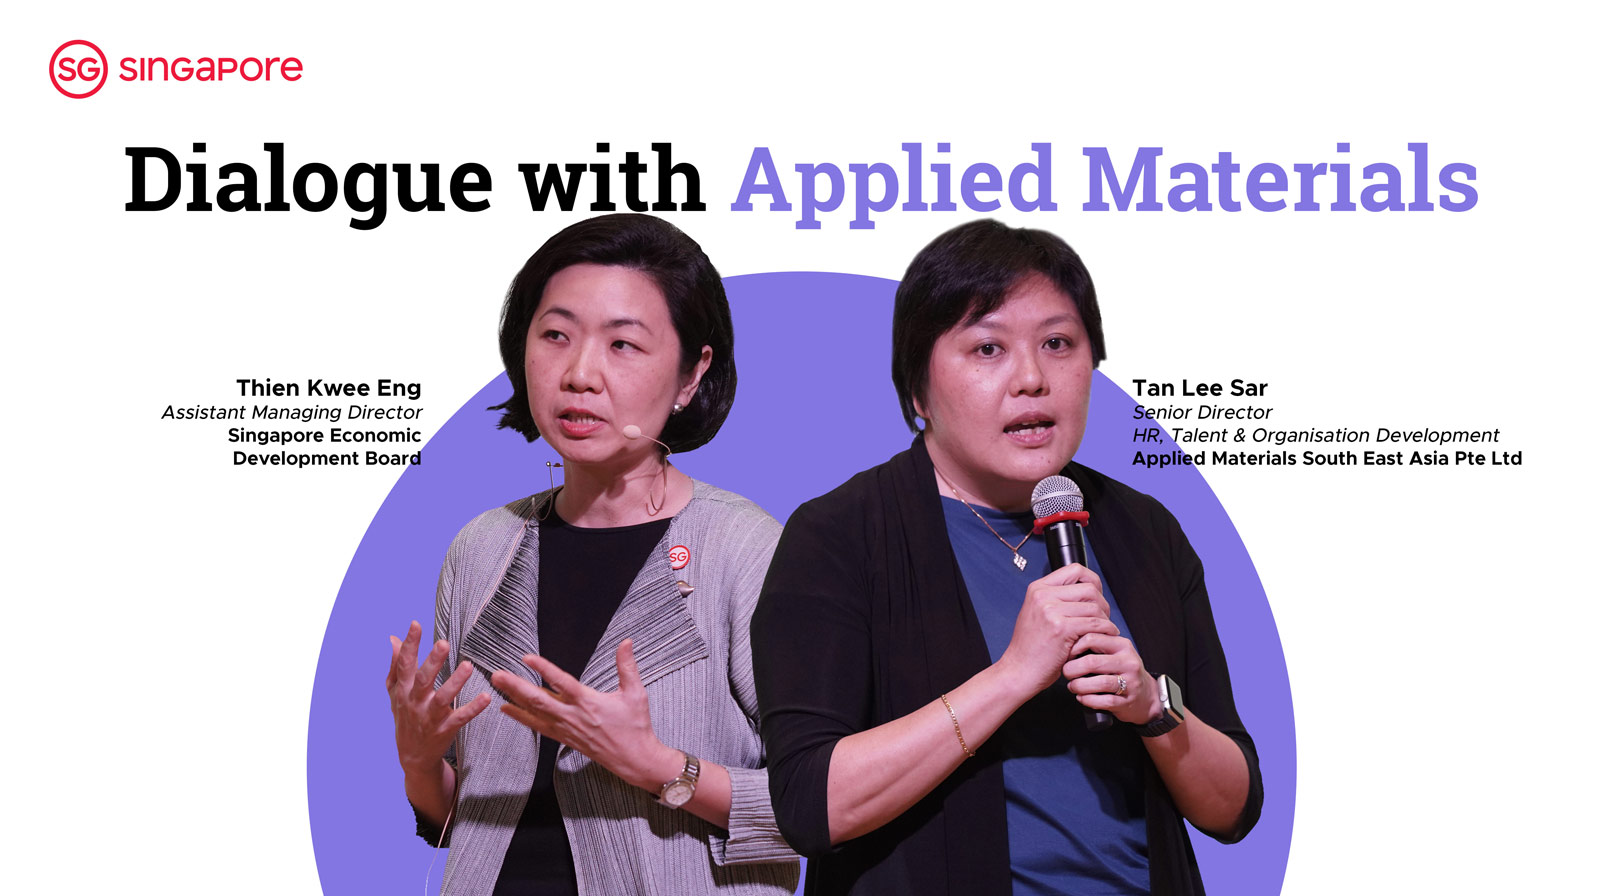 Dialogue with Applied Materials on Manufacturing as a life-long career